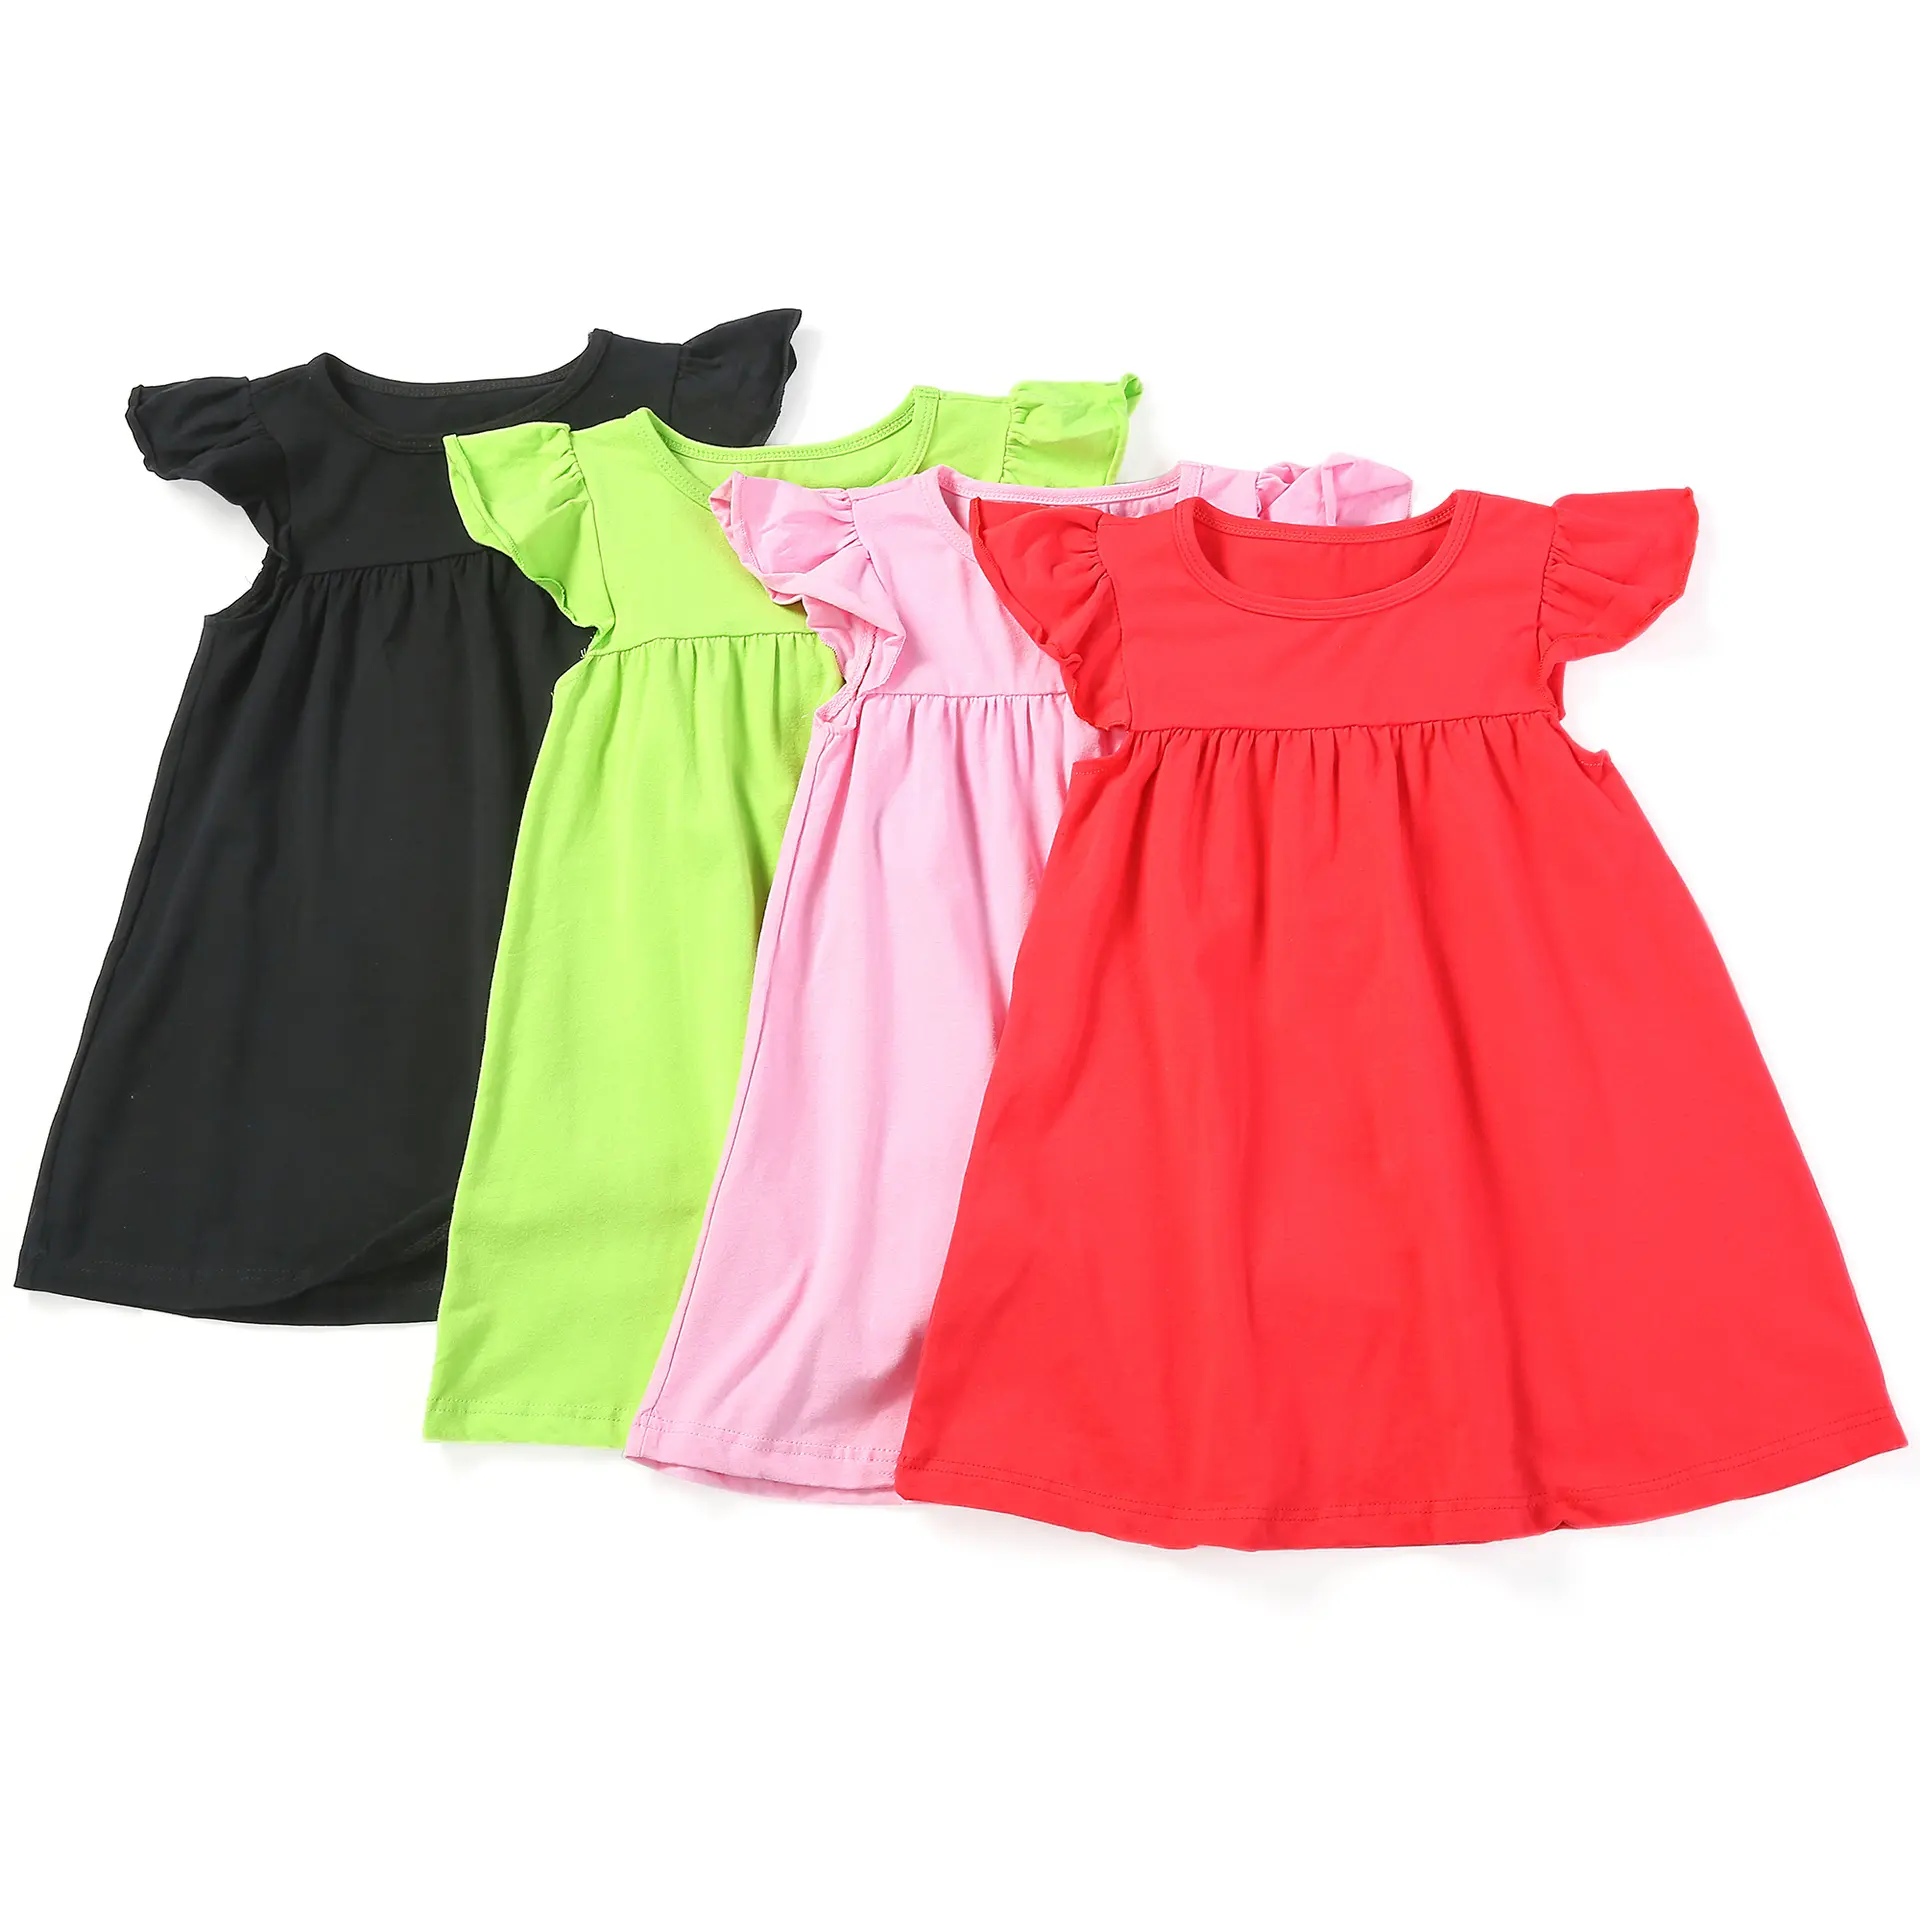 Summer Girls Boutique Kids Clothes Cotton Baby Frock Solid Suspender Skirt Girls Dresses Casual Children Sunny Sleeveless Middle